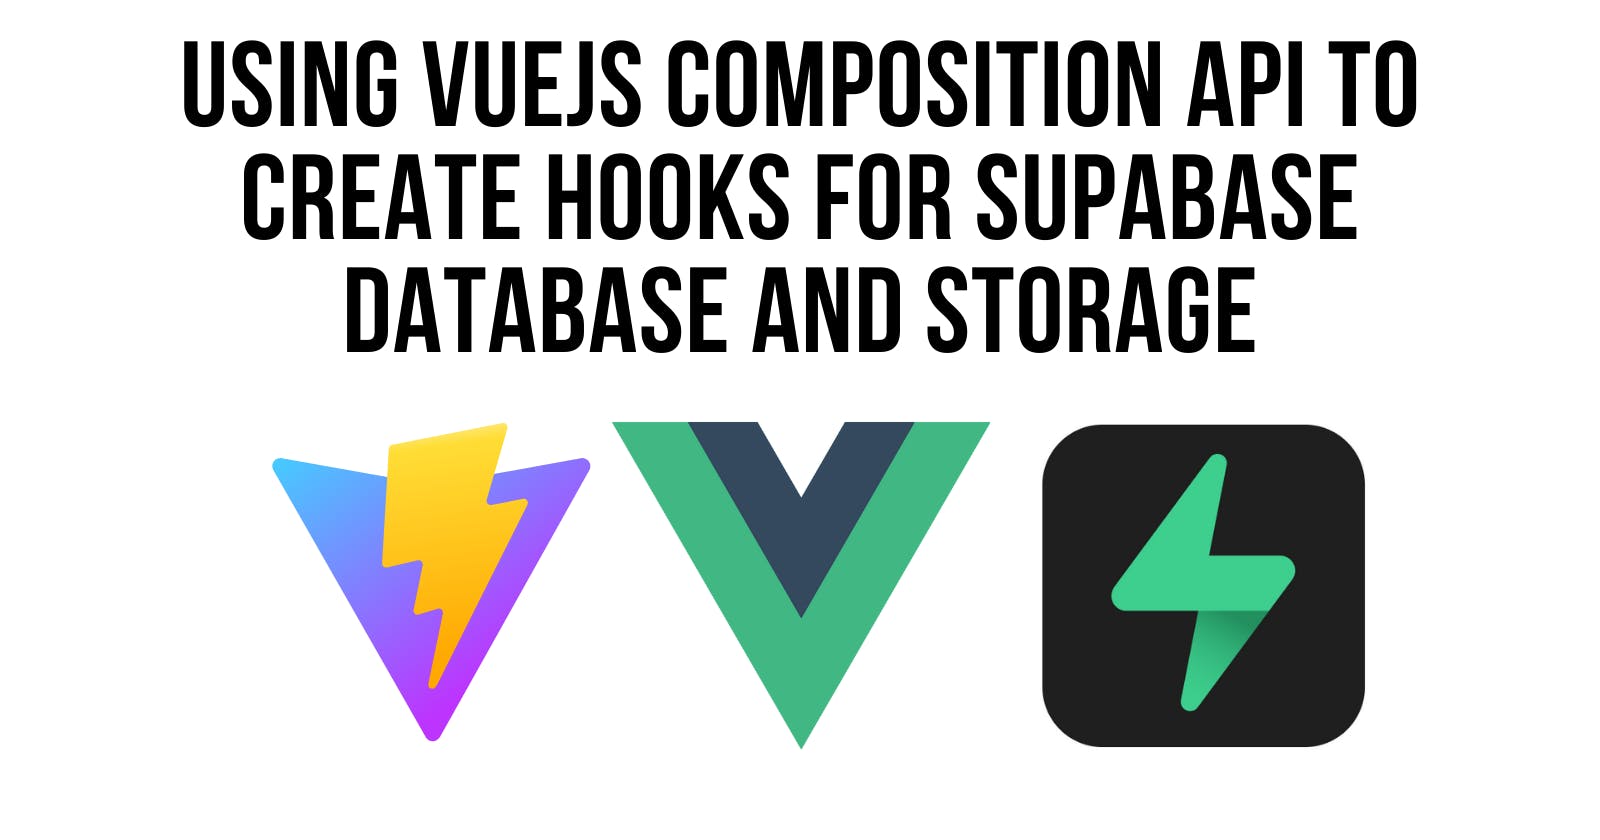 Using the VueJS Composition API to Create Hooks for Supabase Database and Storage